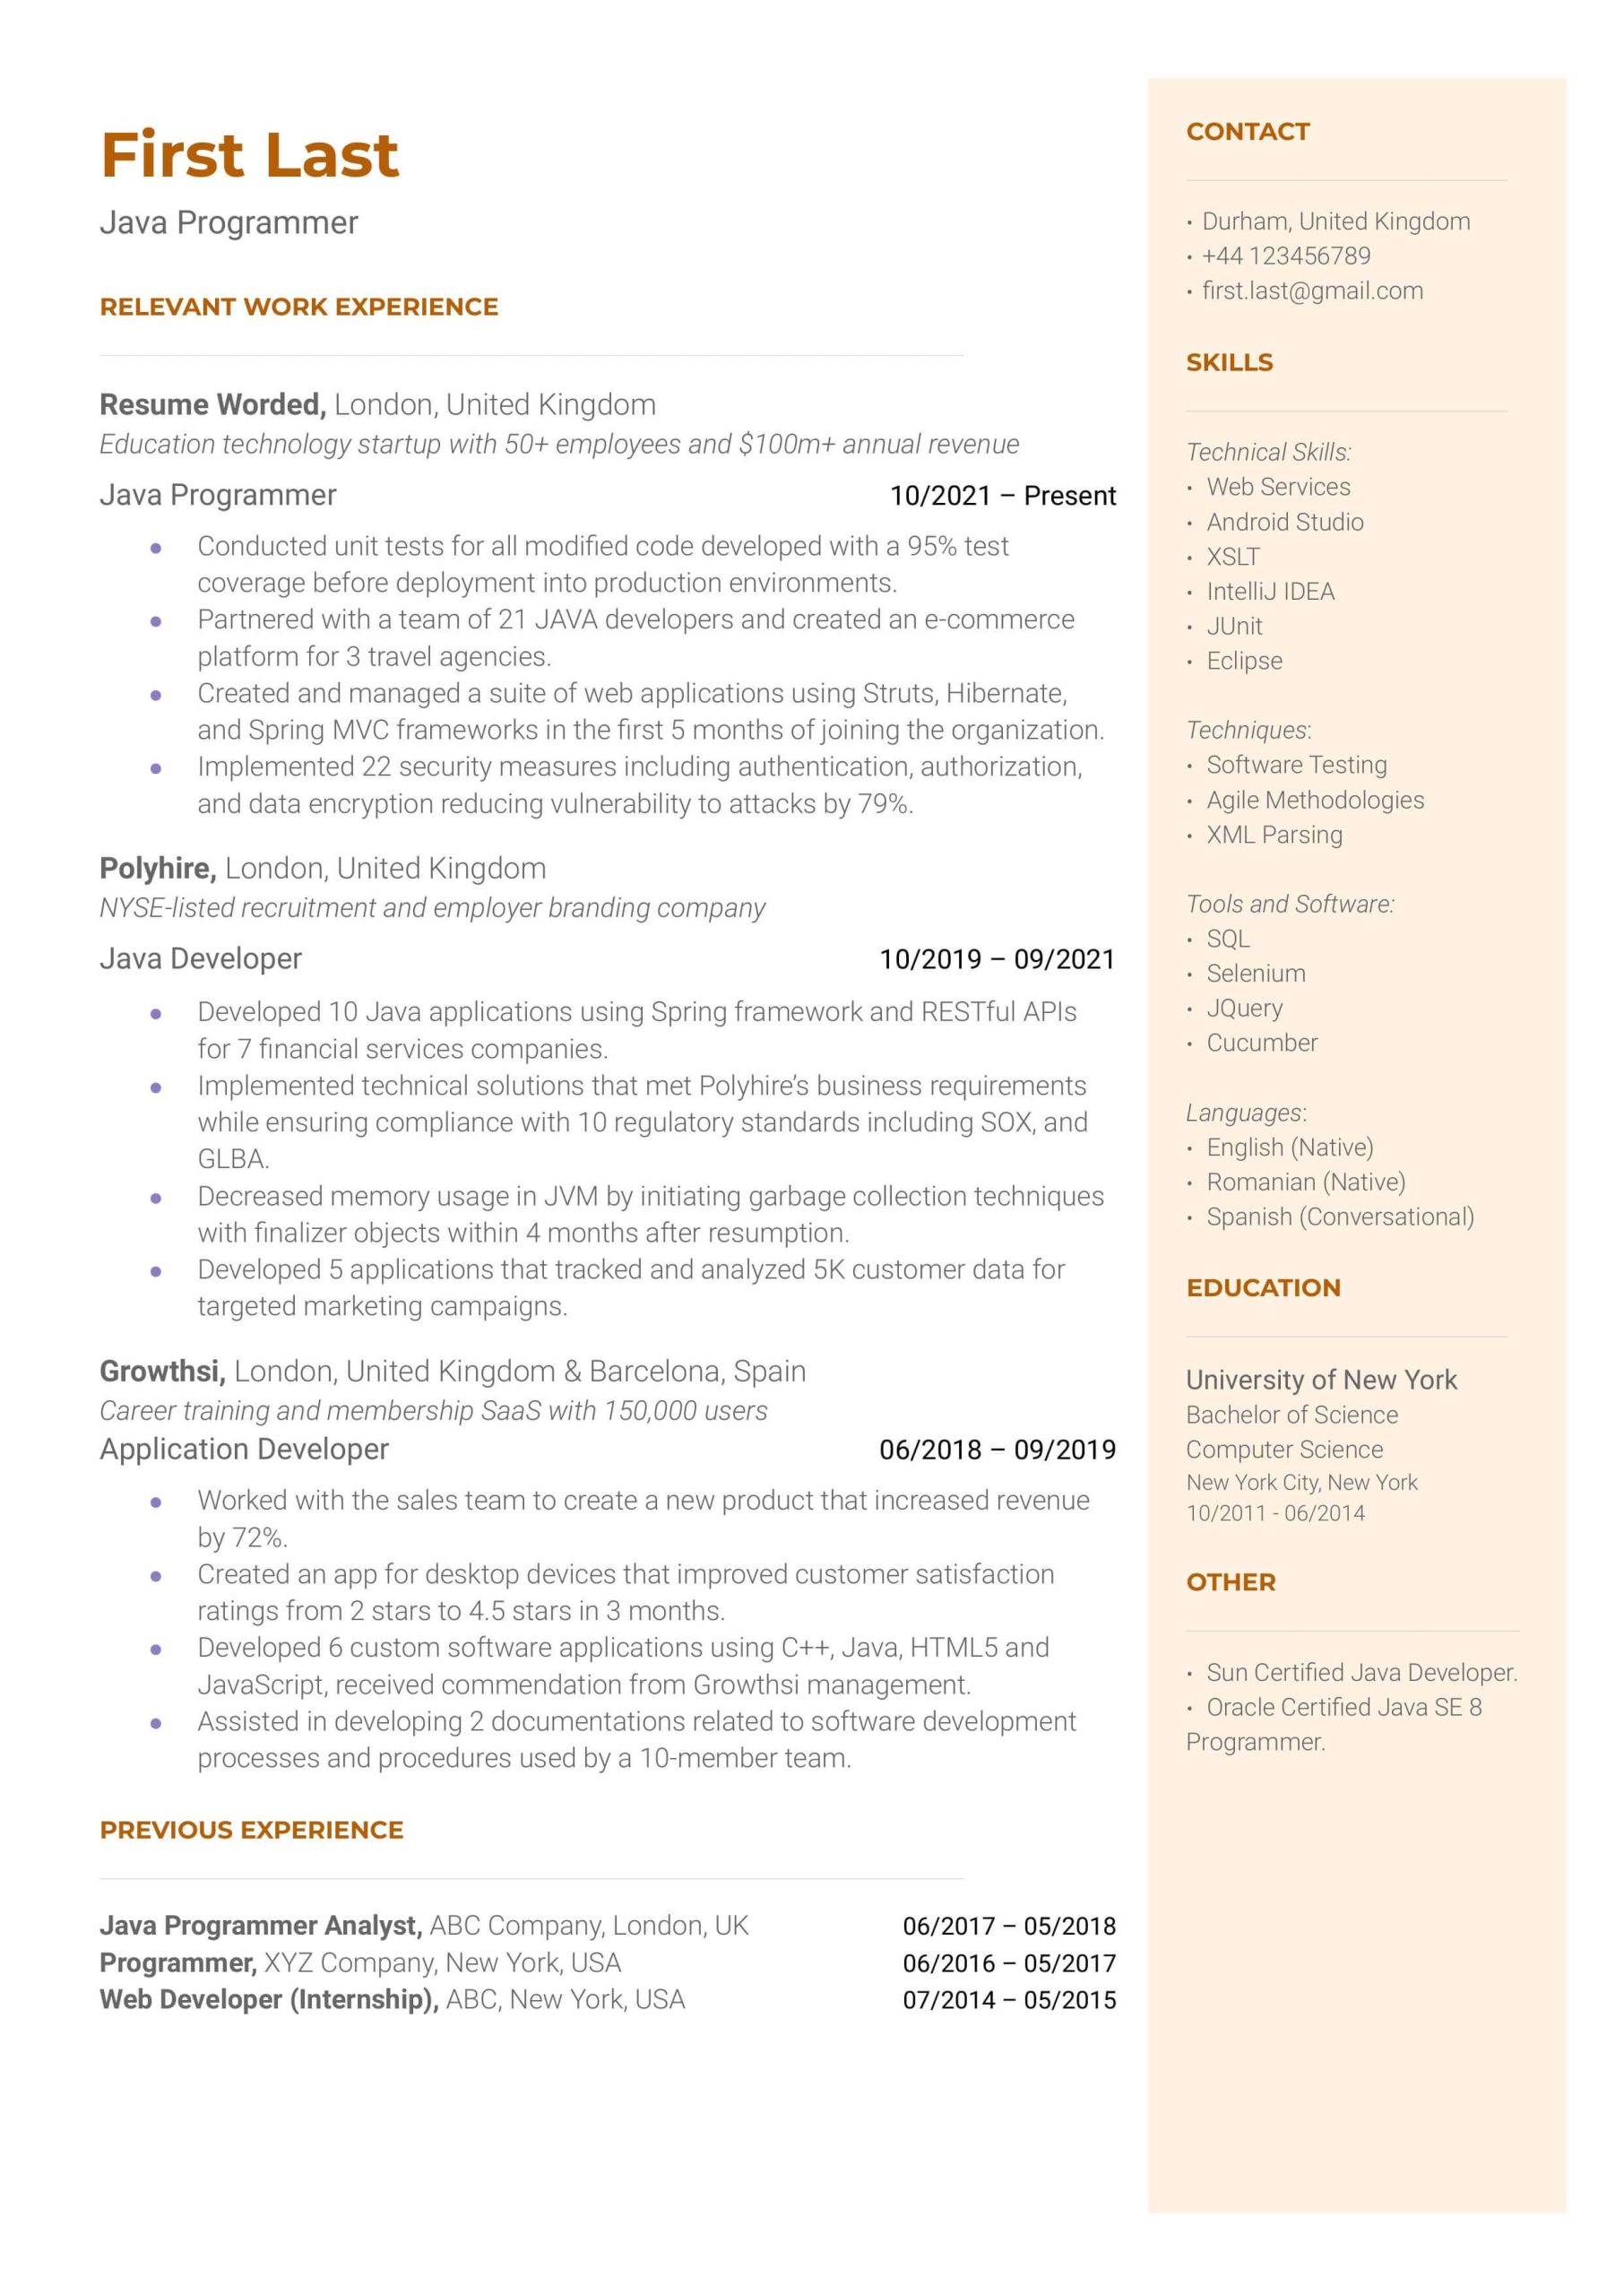 Resume Sample for tool and Die Manager 8 Program Manager Resume Examples for 2022 Resume Worded